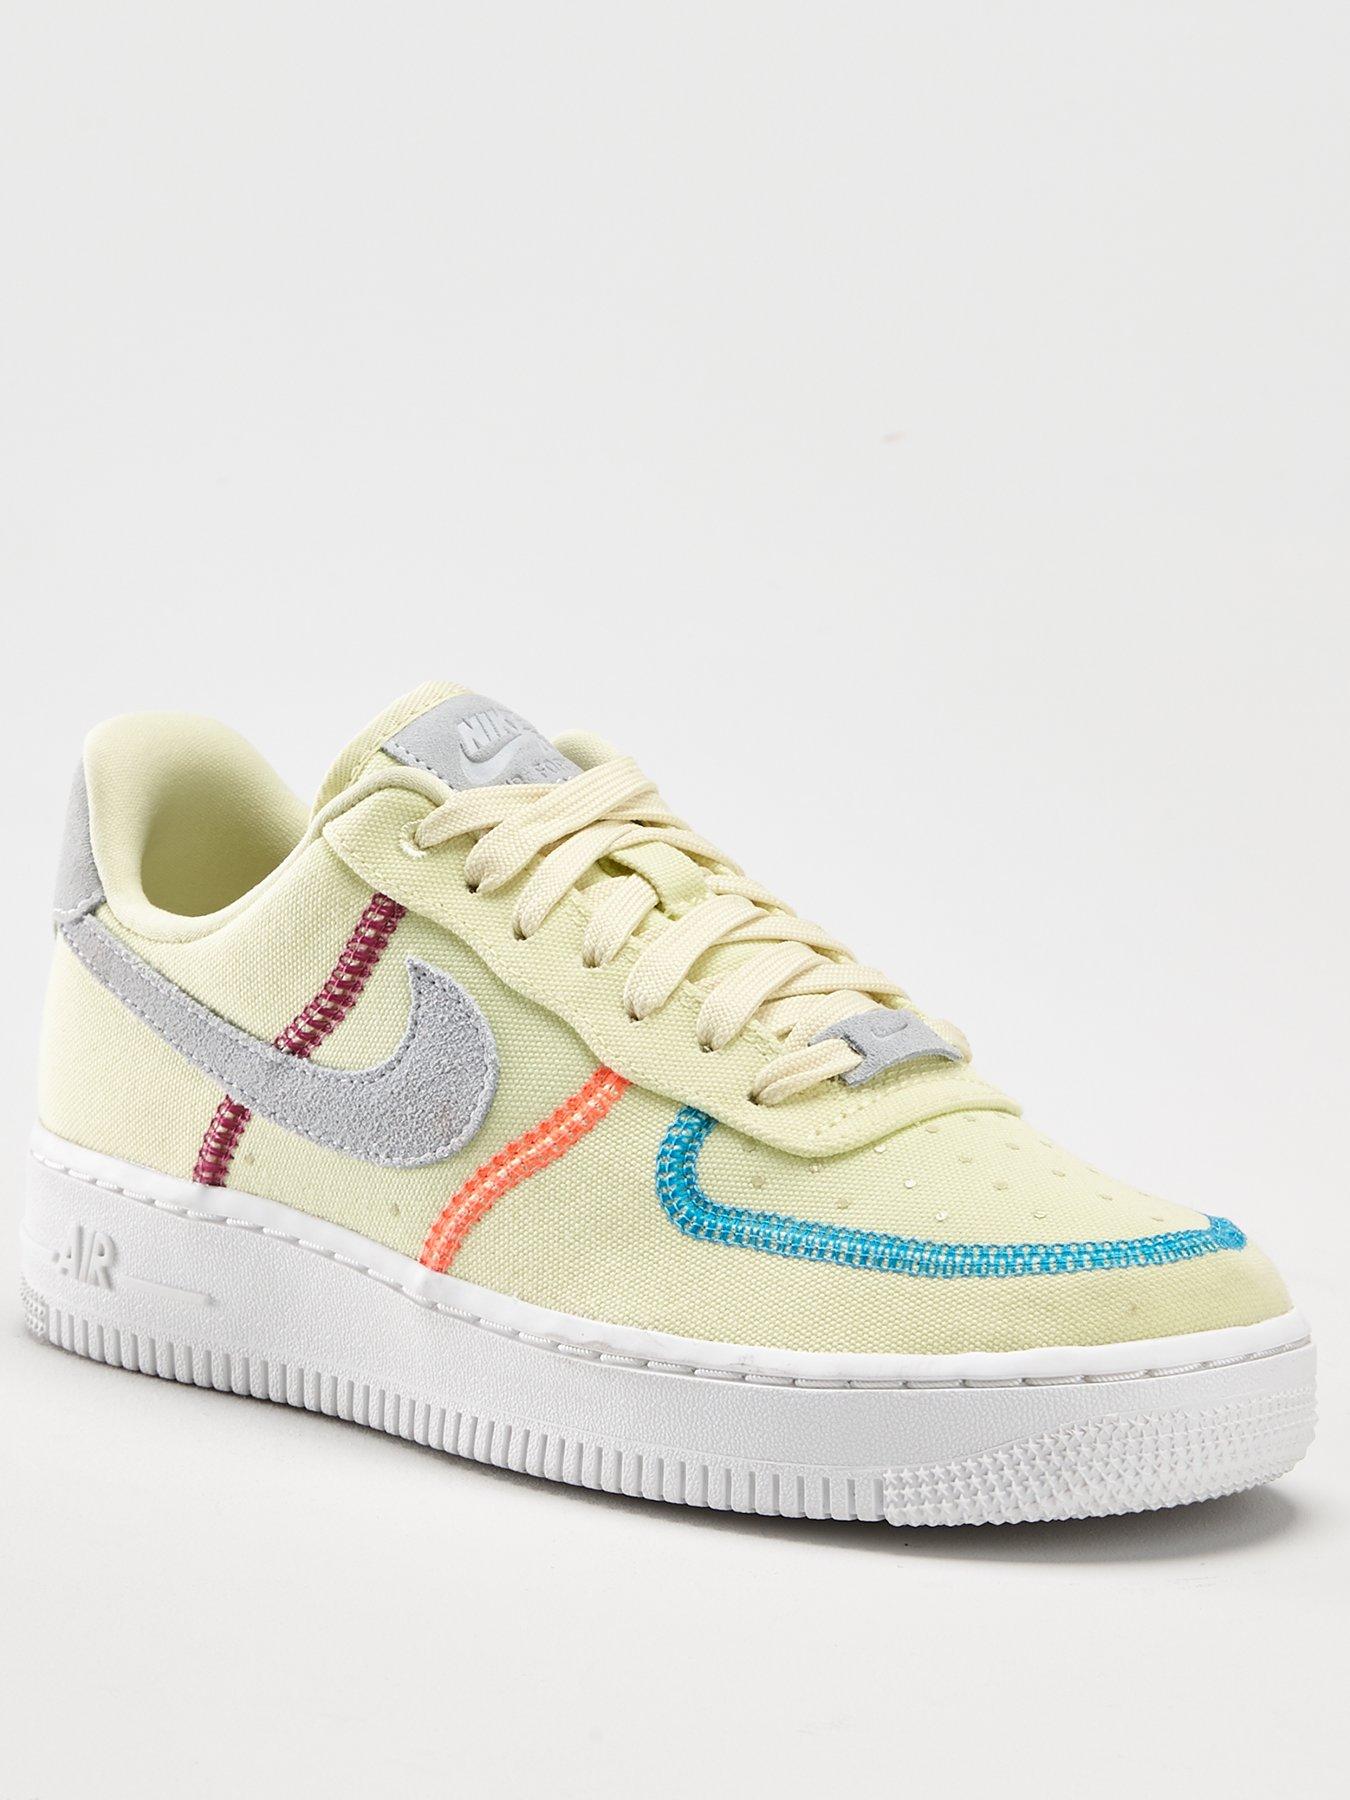 air force one white yellow